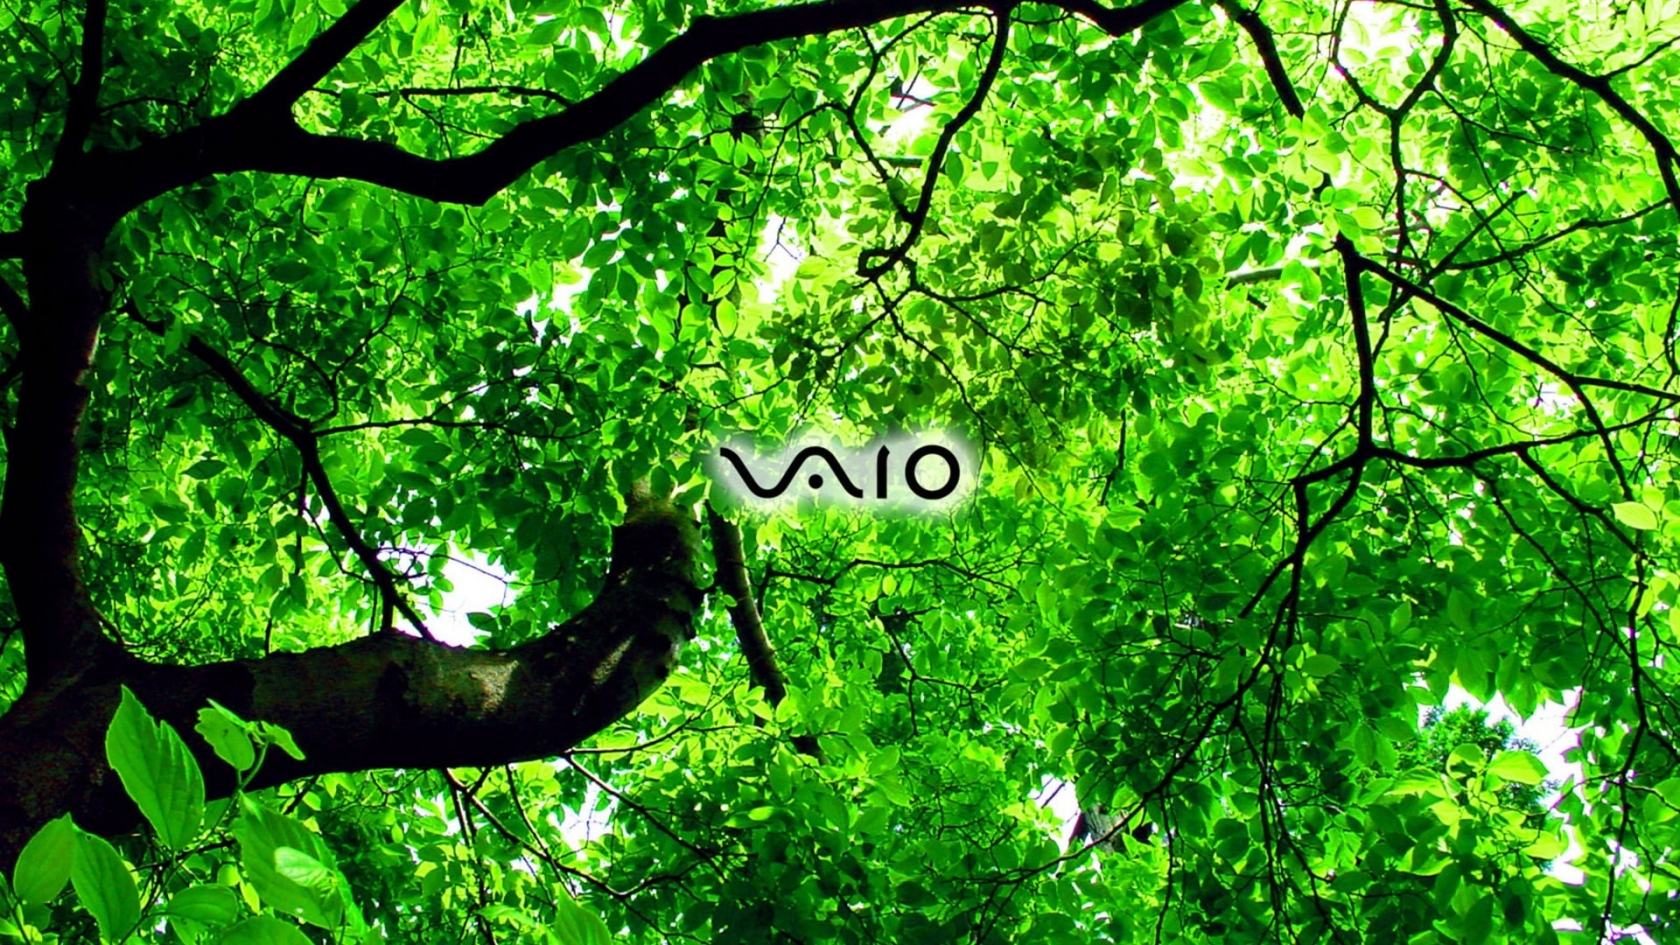 Sony Vaio green for 1680 x 945 HDTV resolution